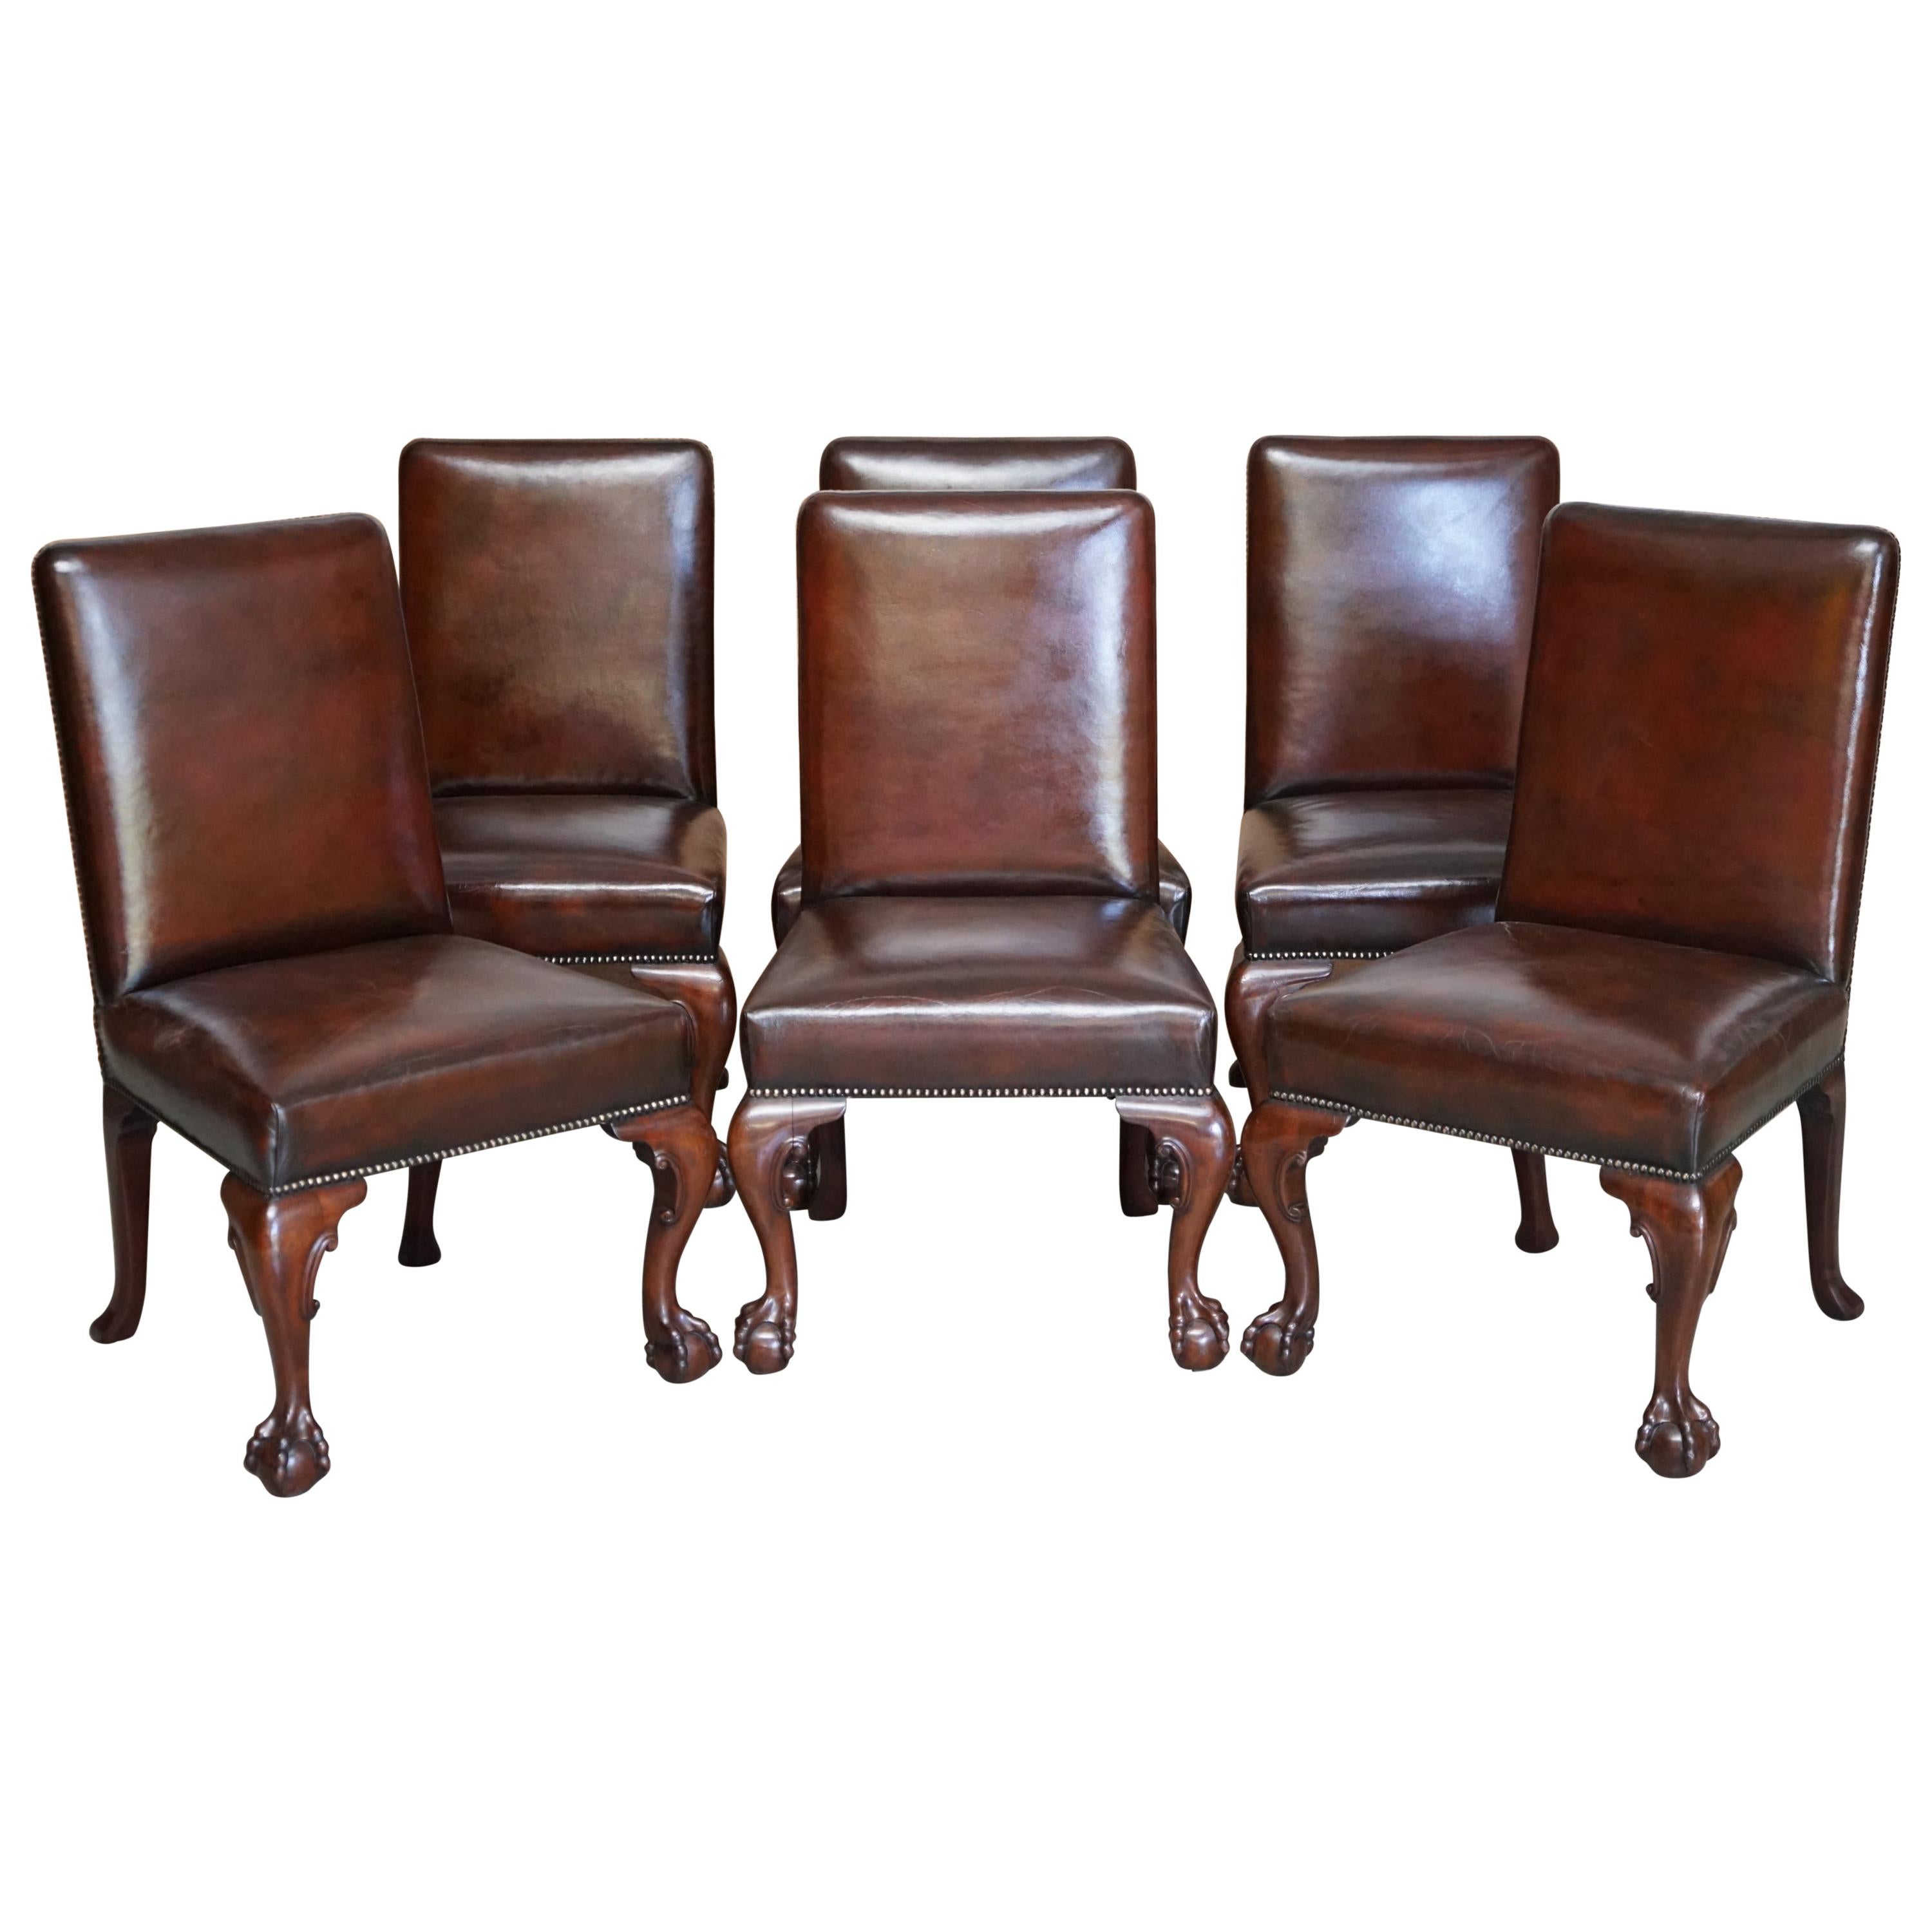 Six Stunning Fully Restored Brown Leather Hardwood Claw & Ball Dining Chairs 6 For Sale